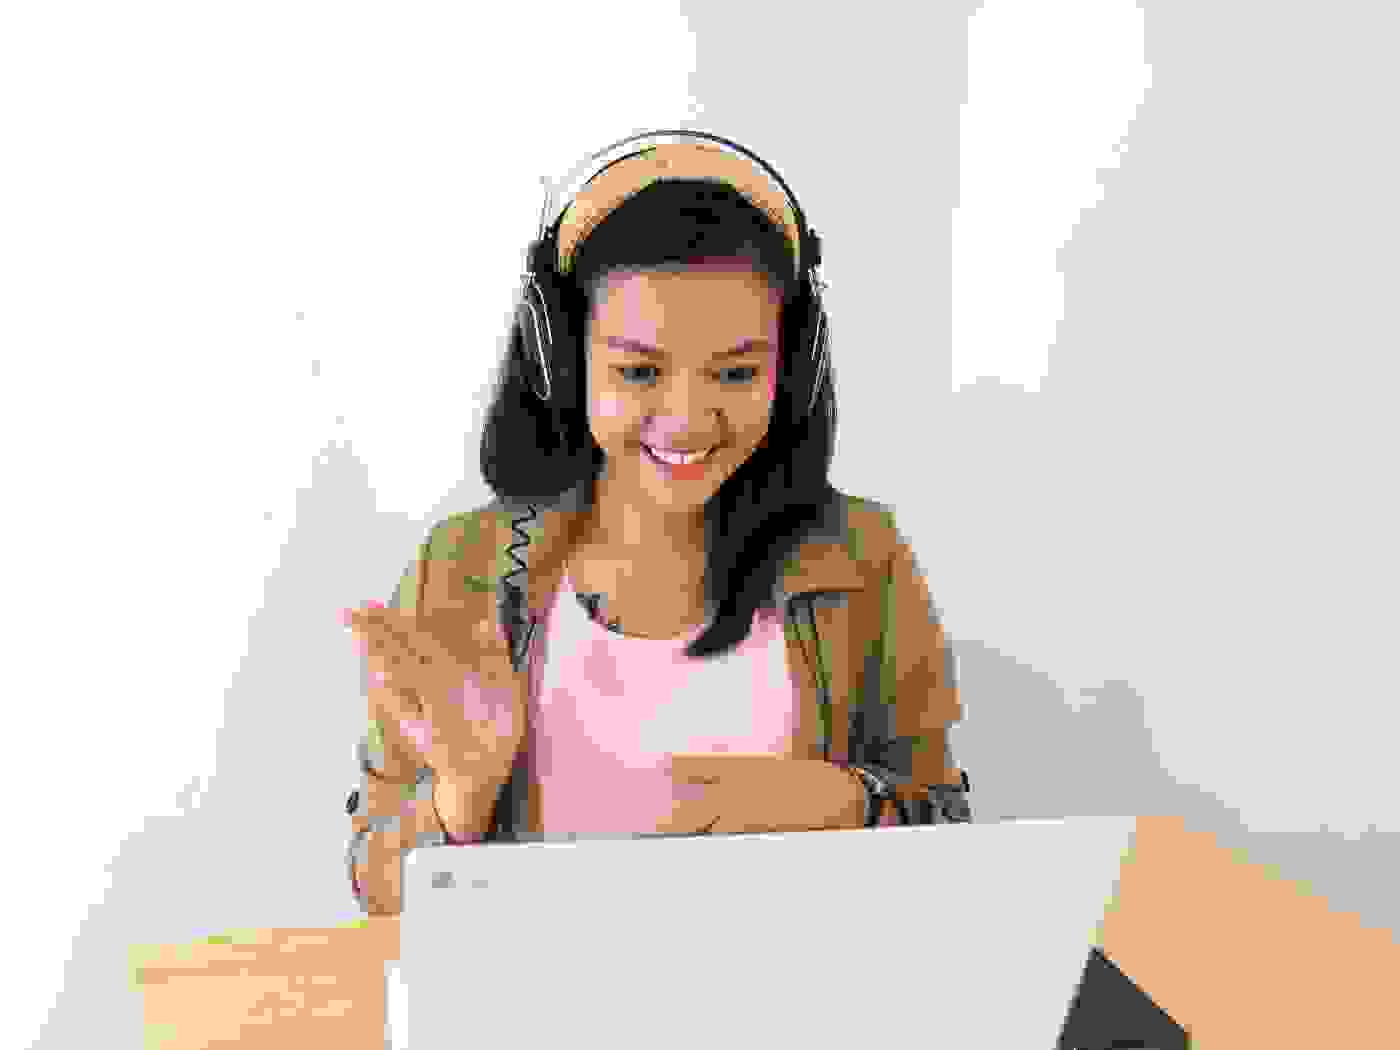 Brown-haired woman waving at a computer screen.